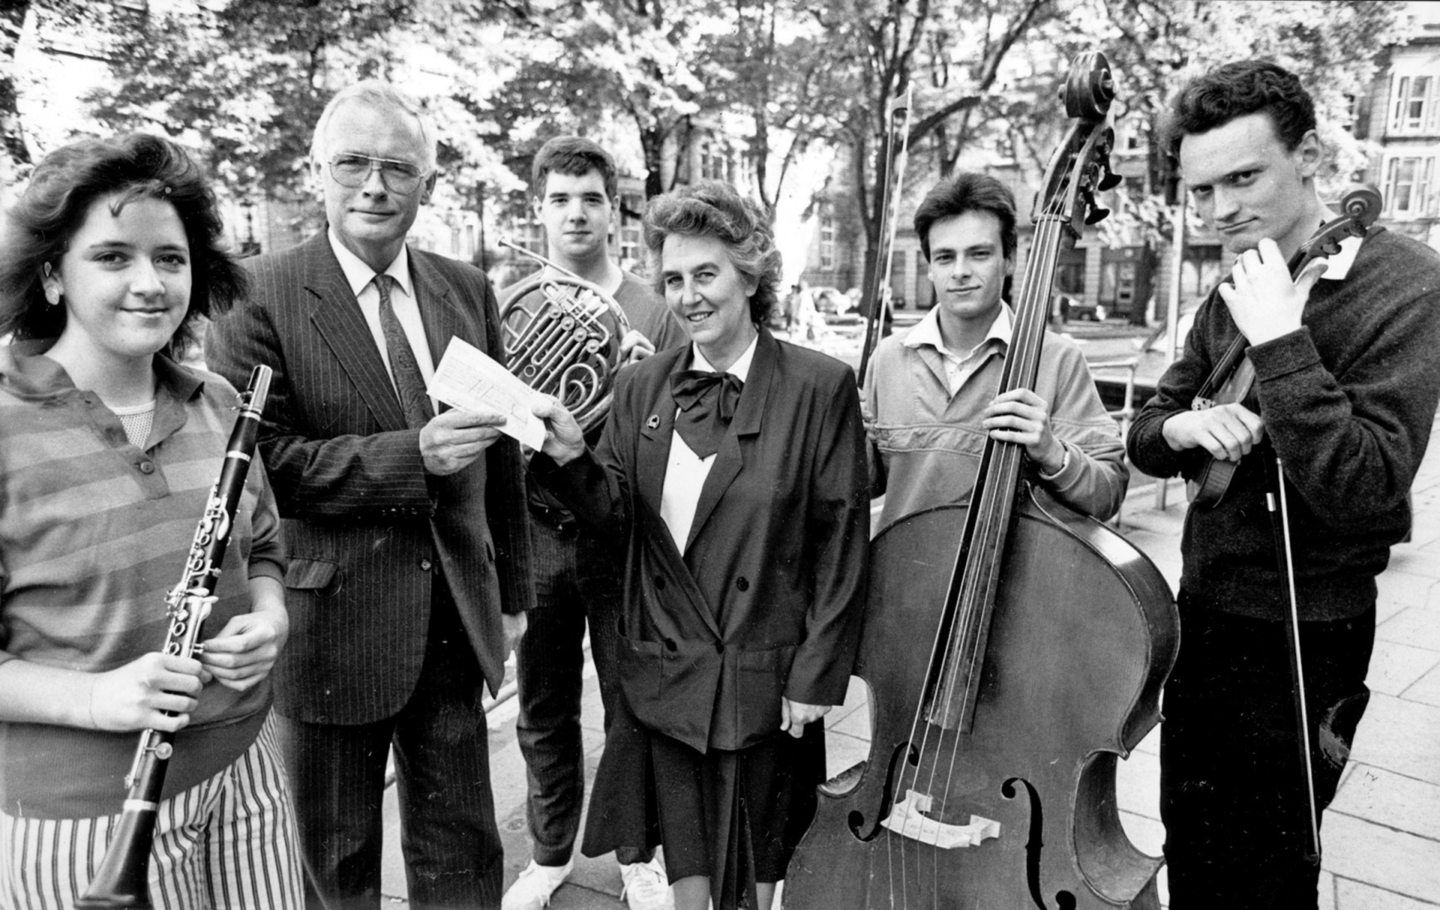 Manager, Bill Neish handing a cheque to Dorothy Hately, secretary/treasurer for the North East of Scotland Music School, surrounded by young people with instruments